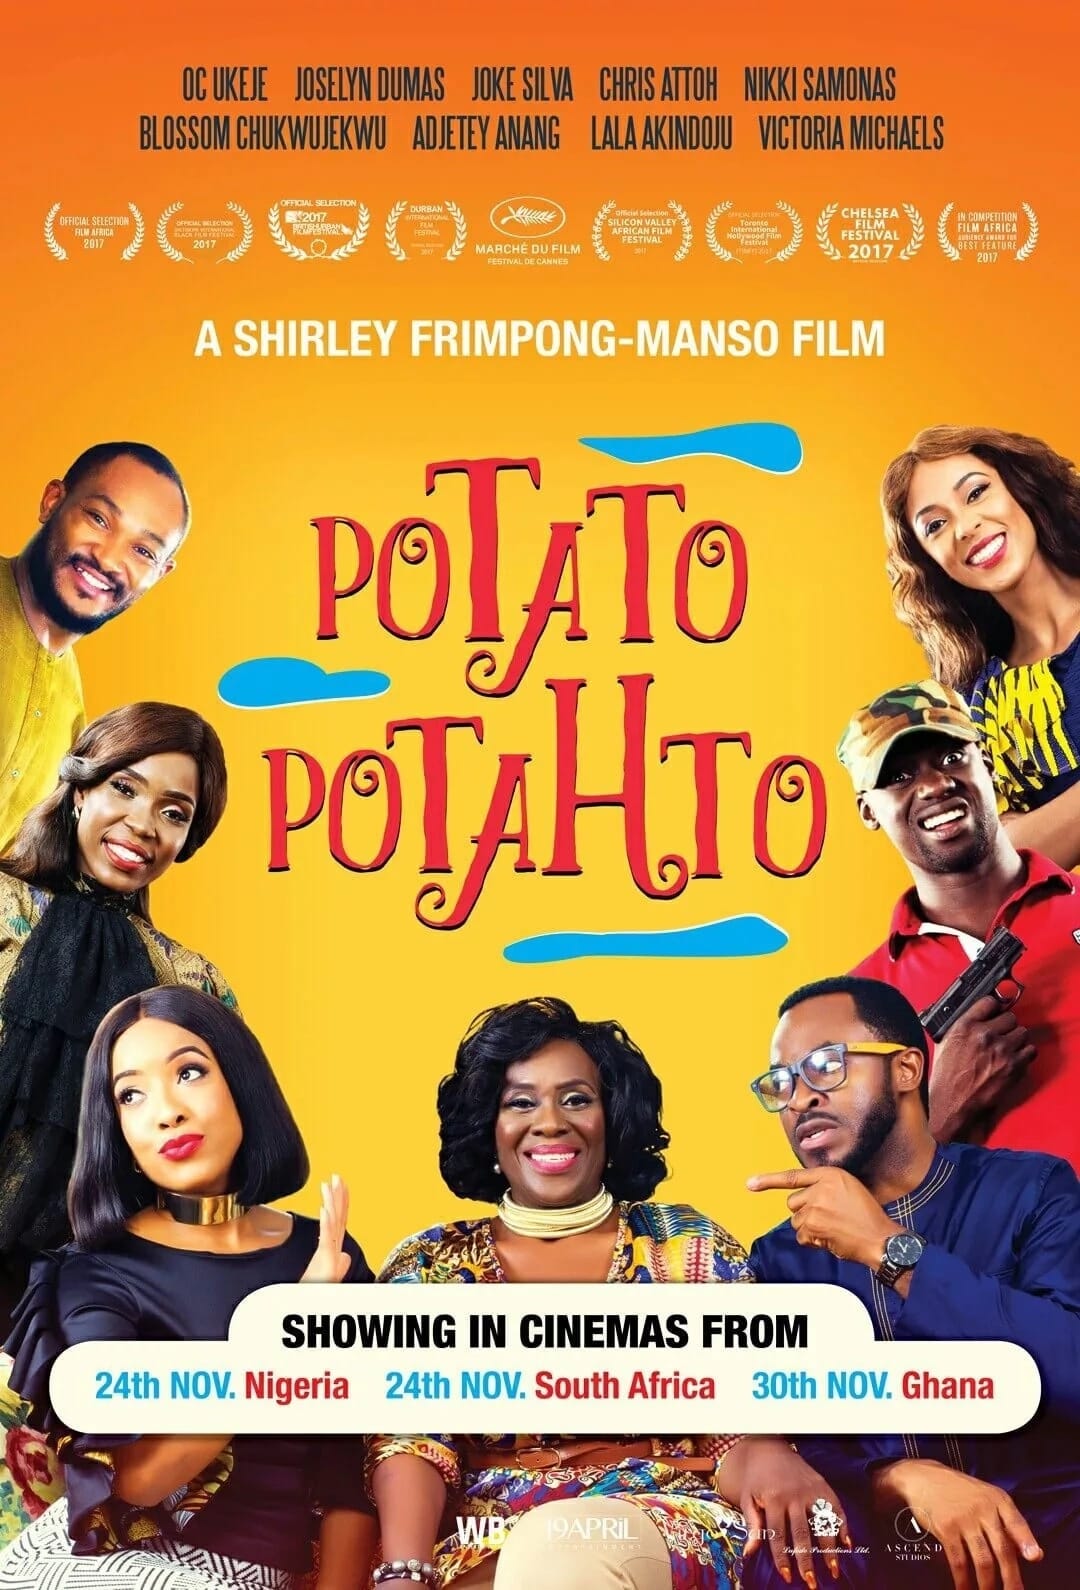 Potato Pohtato has been released in countries outside Ghana